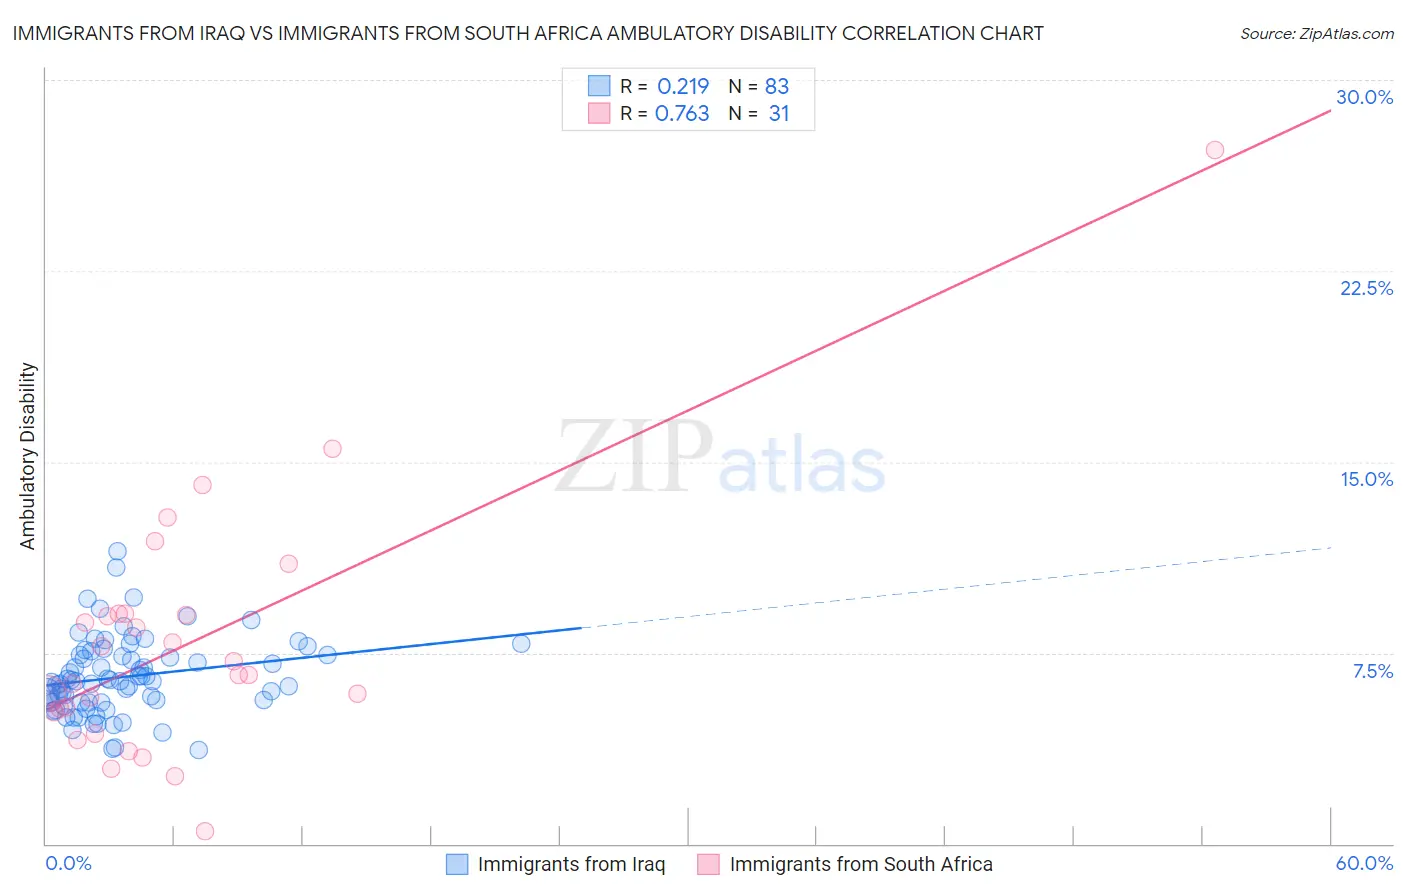 Immigrants from Iraq vs Immigrants from South Africa Ambulatory Disability